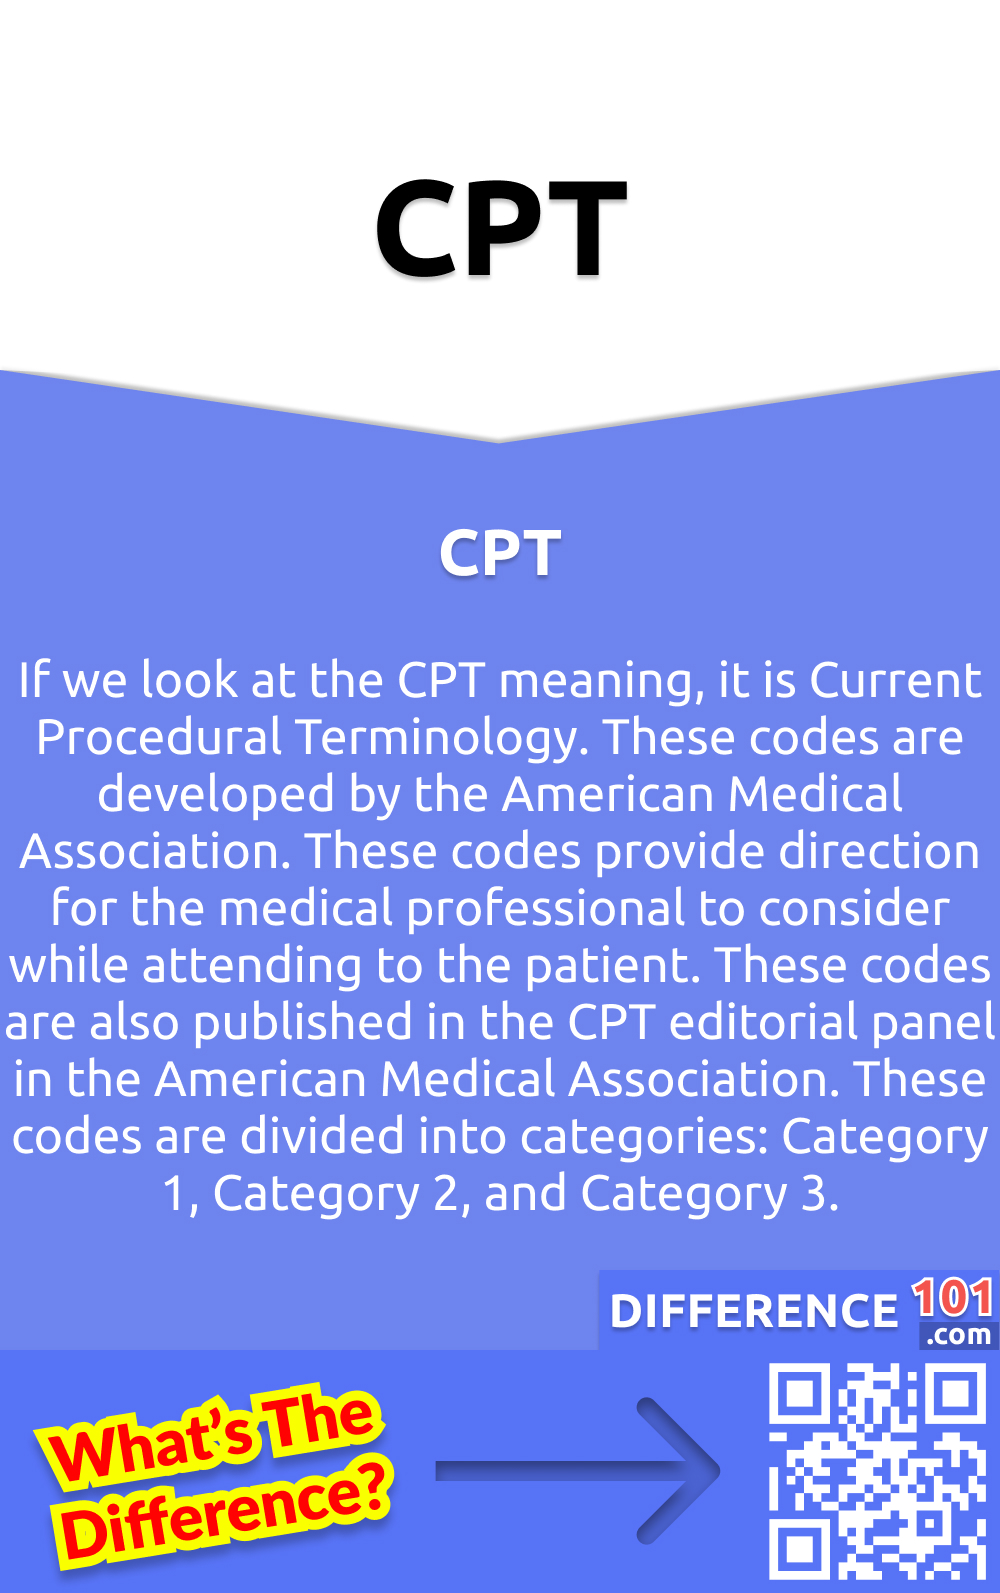 What Is CPT? If we look at the CPT meaning, it is Current Procedural Terminology. These codes are developed by the American Medical Association. These codes provide direction for the medical professional to consider while attending to the patient. These codes are also published in the CPT editorial panel in the American Medical Association. These codes are divided into categories: Category 1, Category 2, and Category 3. Category 1 consists of six sections, which are influenced by medical workers and head ones. These sections are basically odes for medicine, surgery, pathology, radiology, anesthesia, evaluation and management. Category 2 provides the description of the codes which have to be followed by the ones who are evaluating and managing the patients. The last, Category 3, is developed to address emerging technology in the medical field. But this category is paid for by every organization, which is the desire to access this s. It is owned by the AMA.